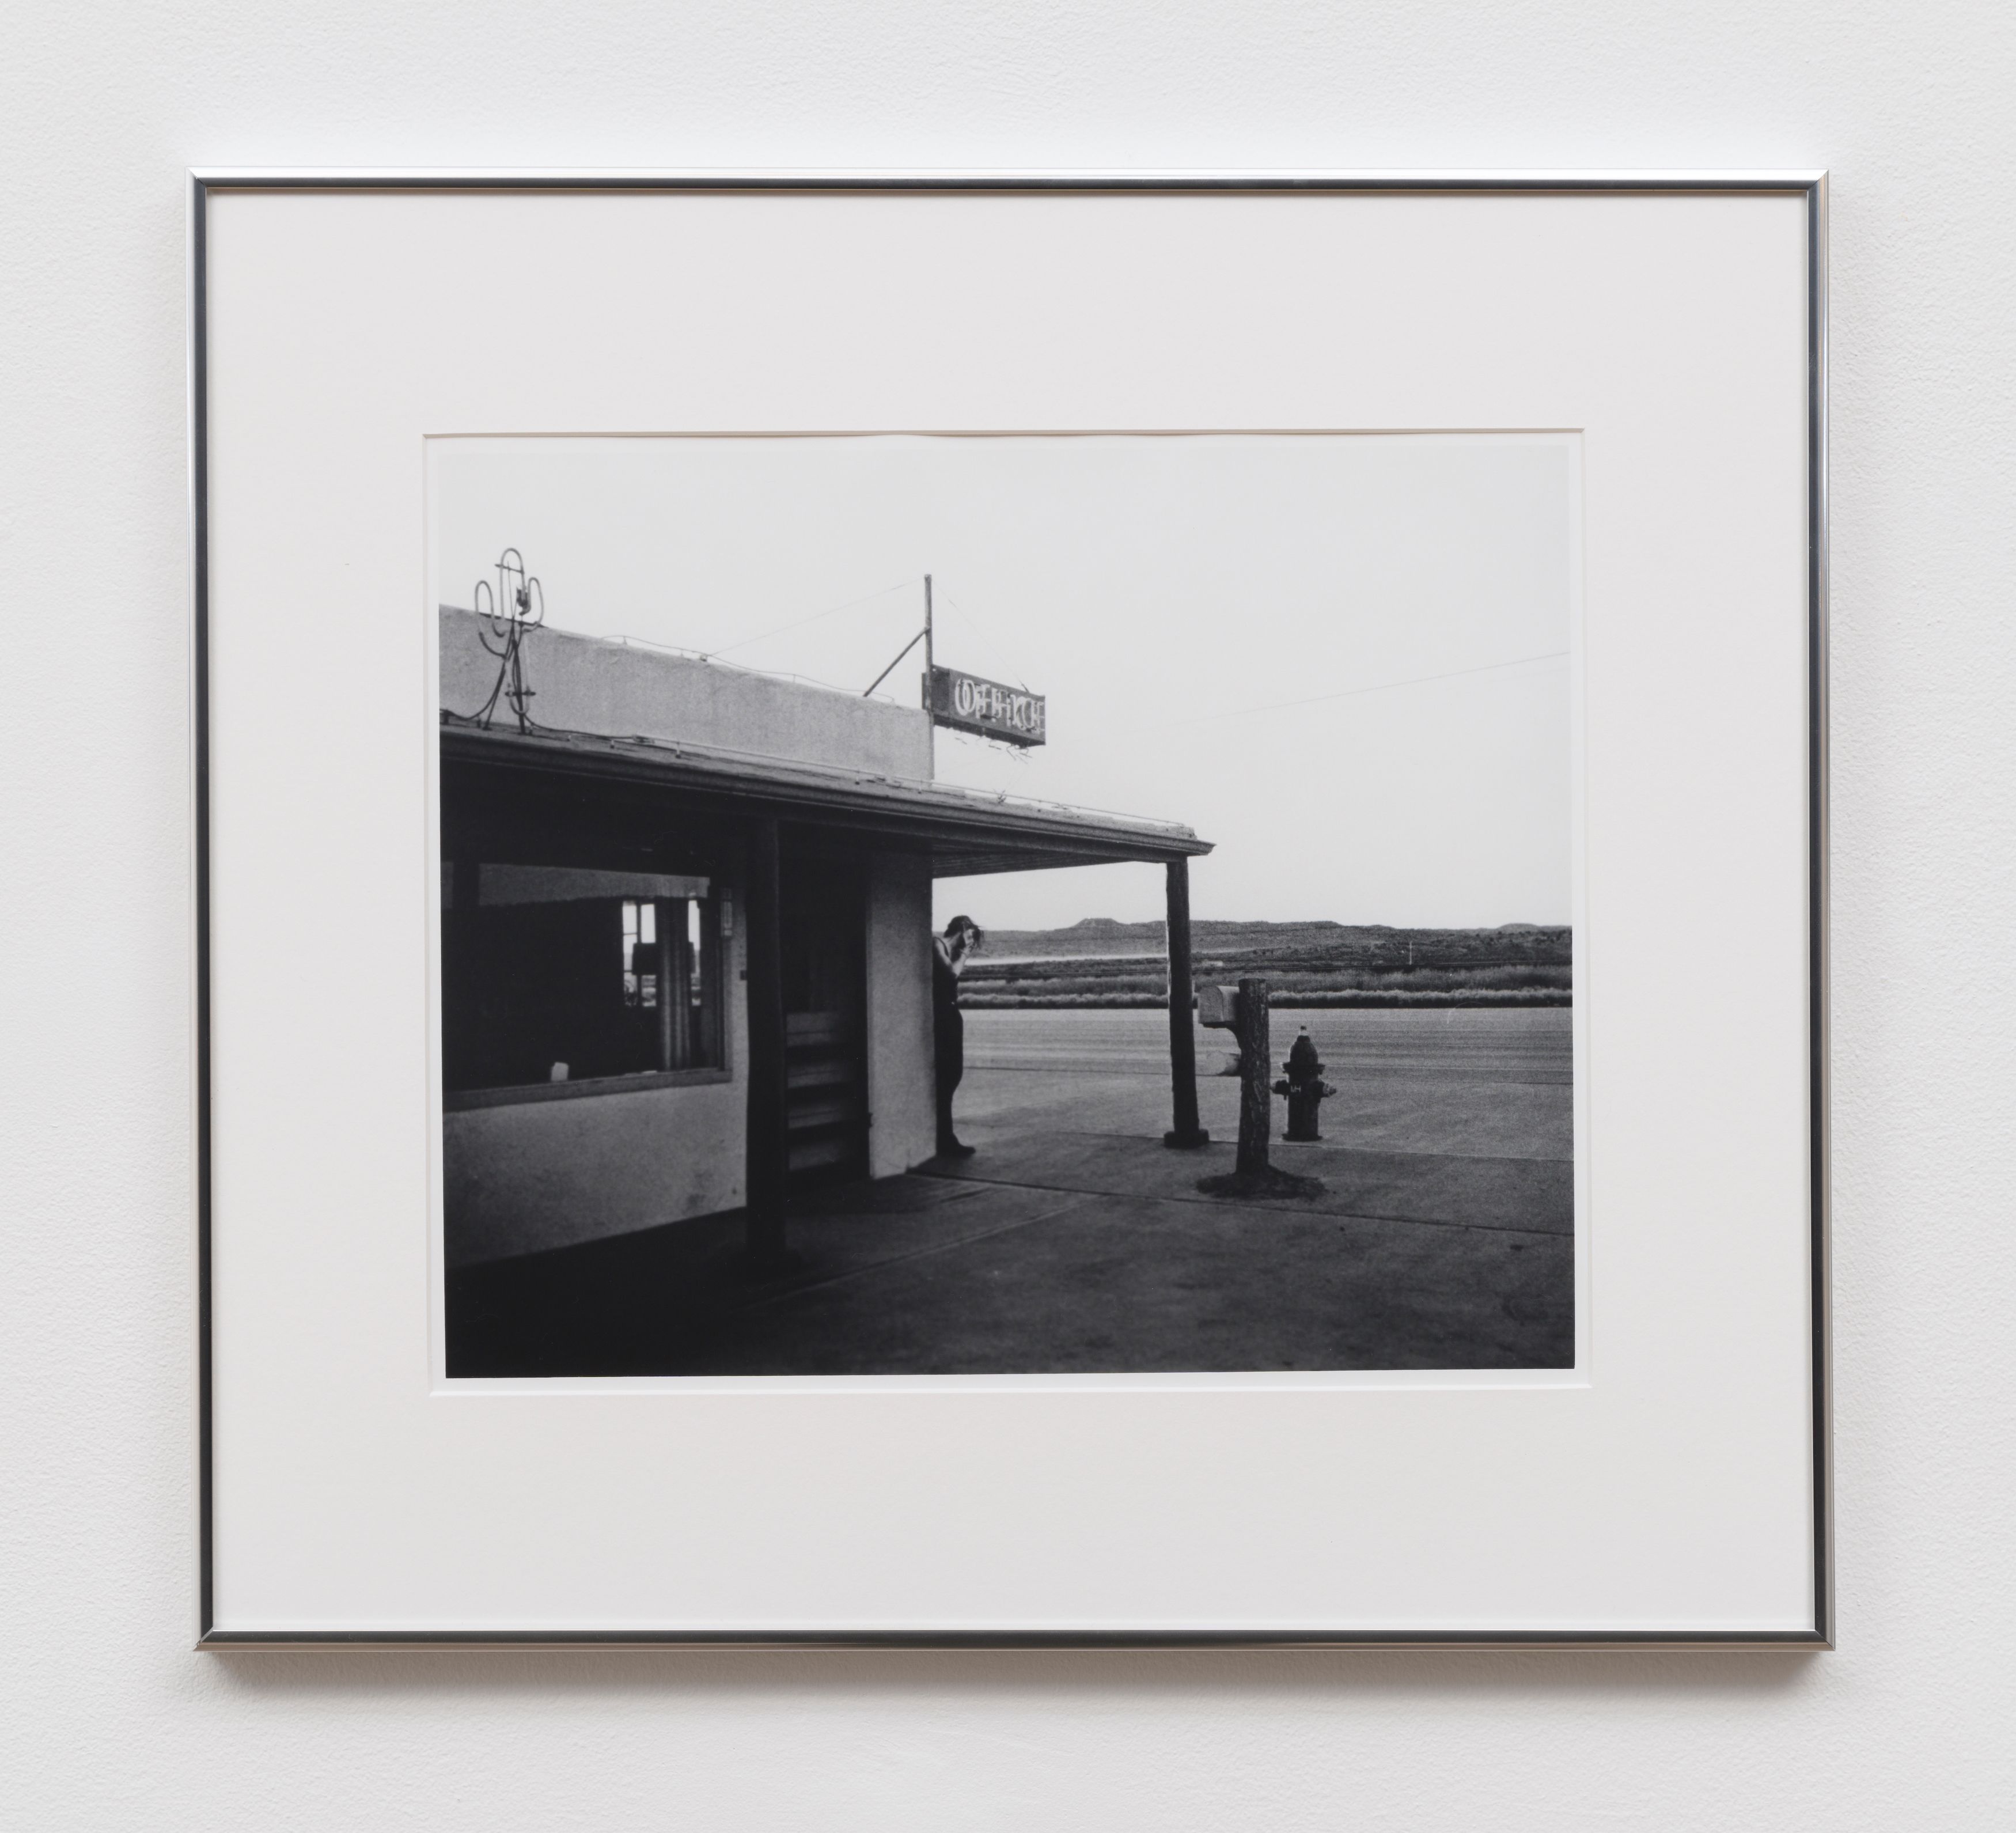 Erin Calla Watson, Route 66 Motels II, 2023, gelatin silver print, 12 3/16 x 14 in. (31.01 x 35.56 cm) (image size), 18 x 20 in. (45.72 x 50.08 cm) (framed size), edition of 3 with 2 AP